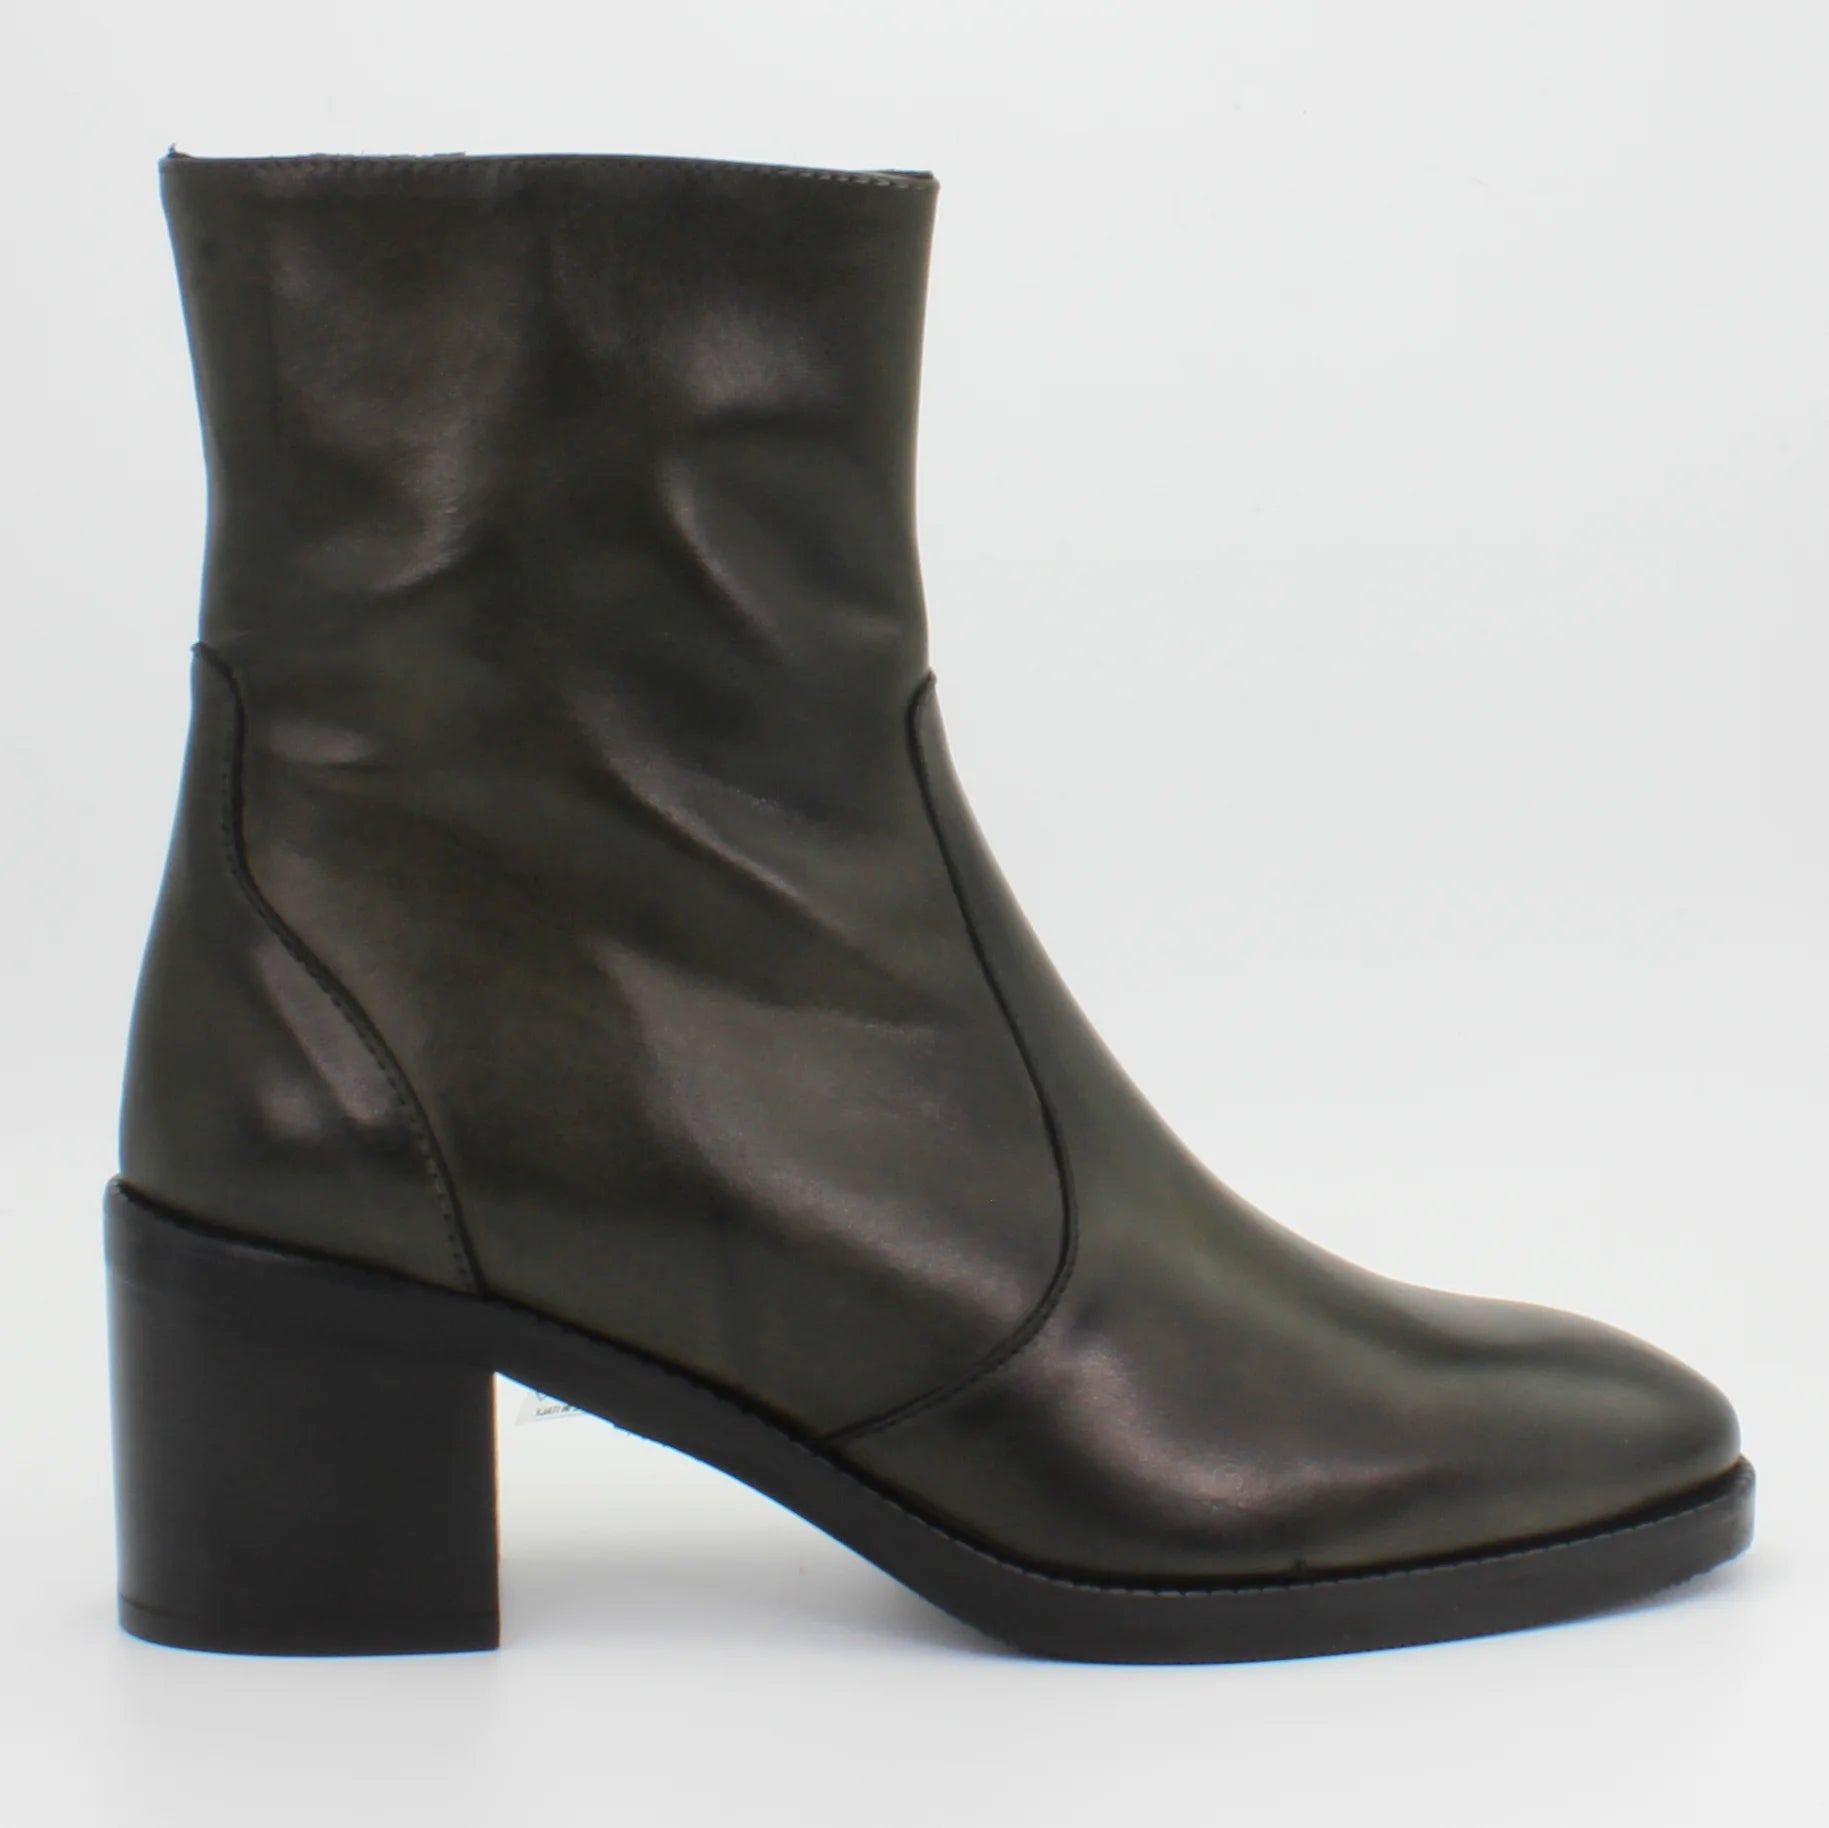 Shop Handmade Italian Leather Boot in Verde (GC3411) or browse our range of hand-made Italian boots for women in leather or suede in-store at Aliverti Cape Town, or shop online. We deliver in South Africa & offer multiple payment plans as well as accept multiple safe & secure payment methods.